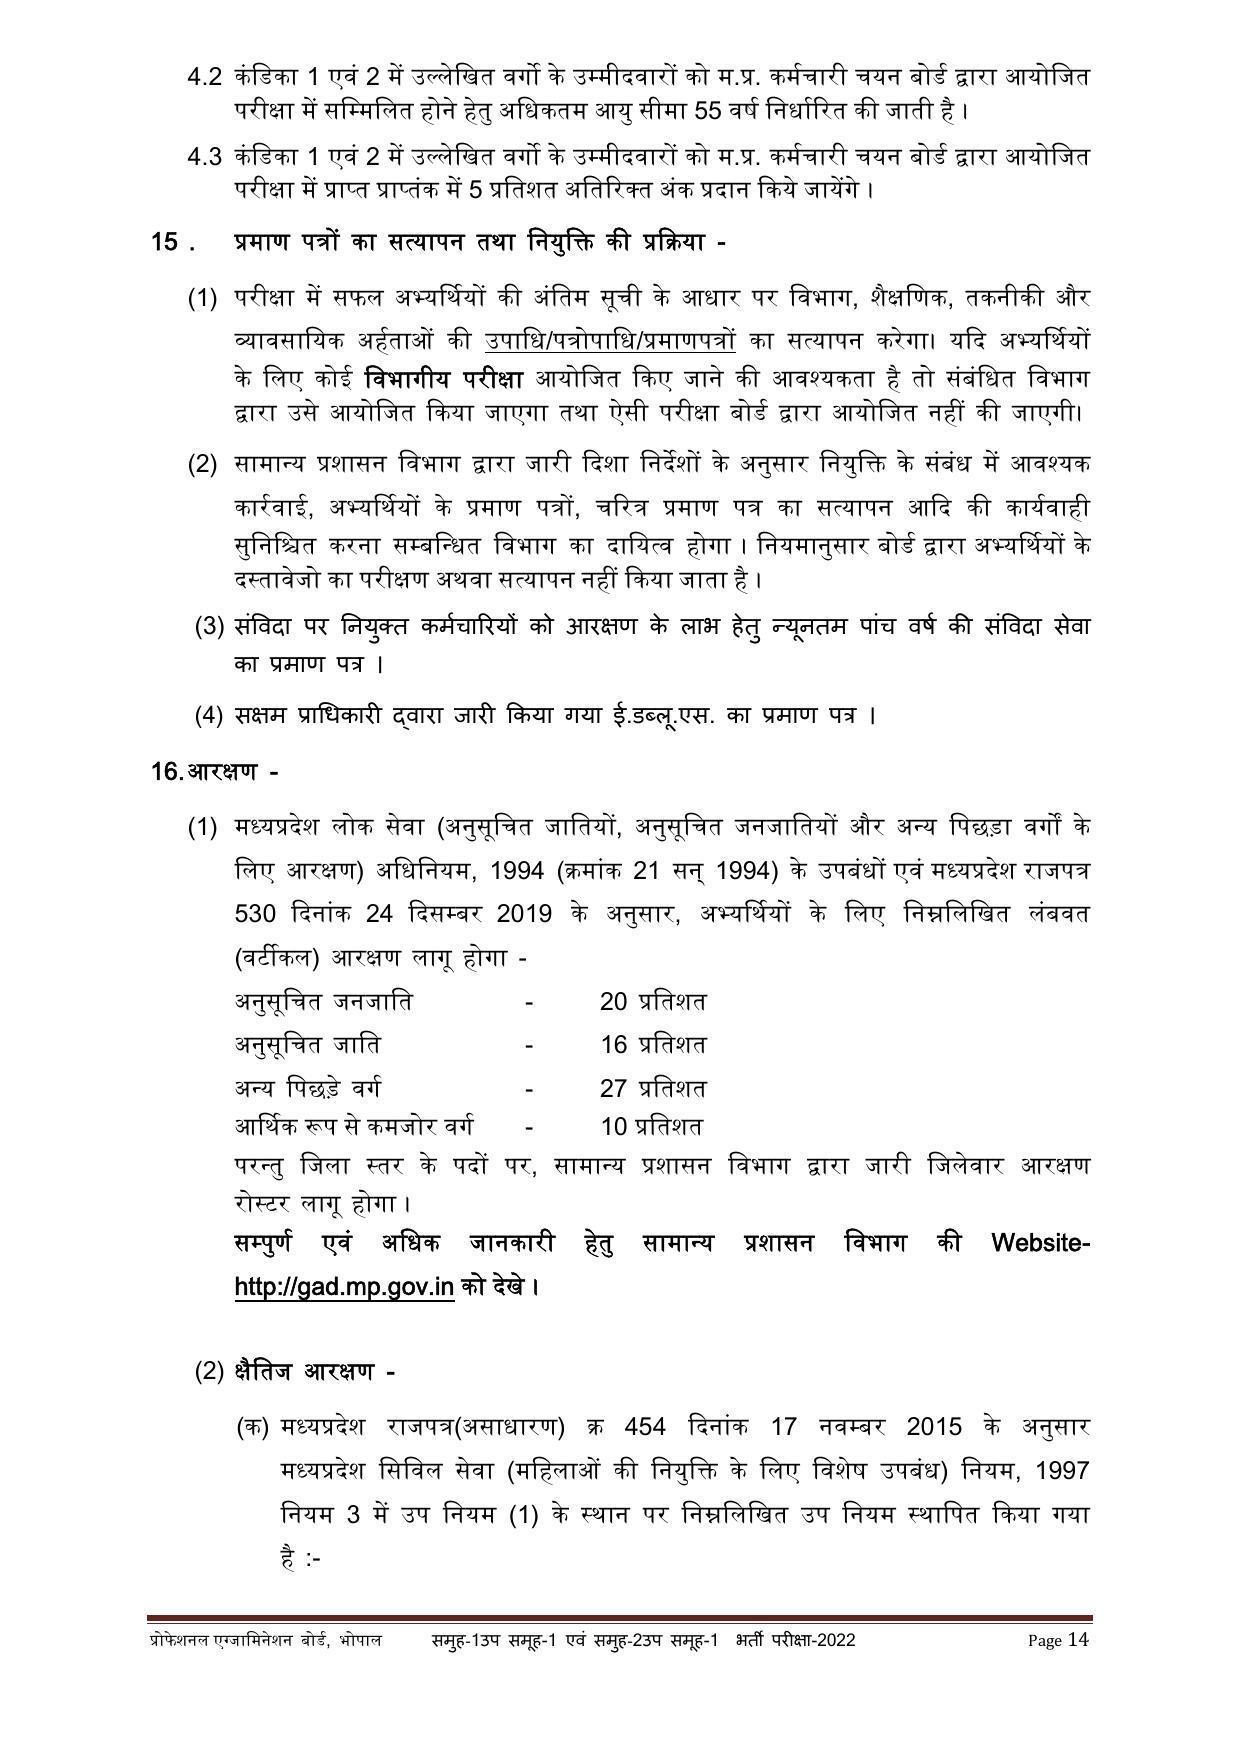 MPPEB Group-I Sub Group-I & Group-II Sub Group-I Recruitment 2022 - Page 45